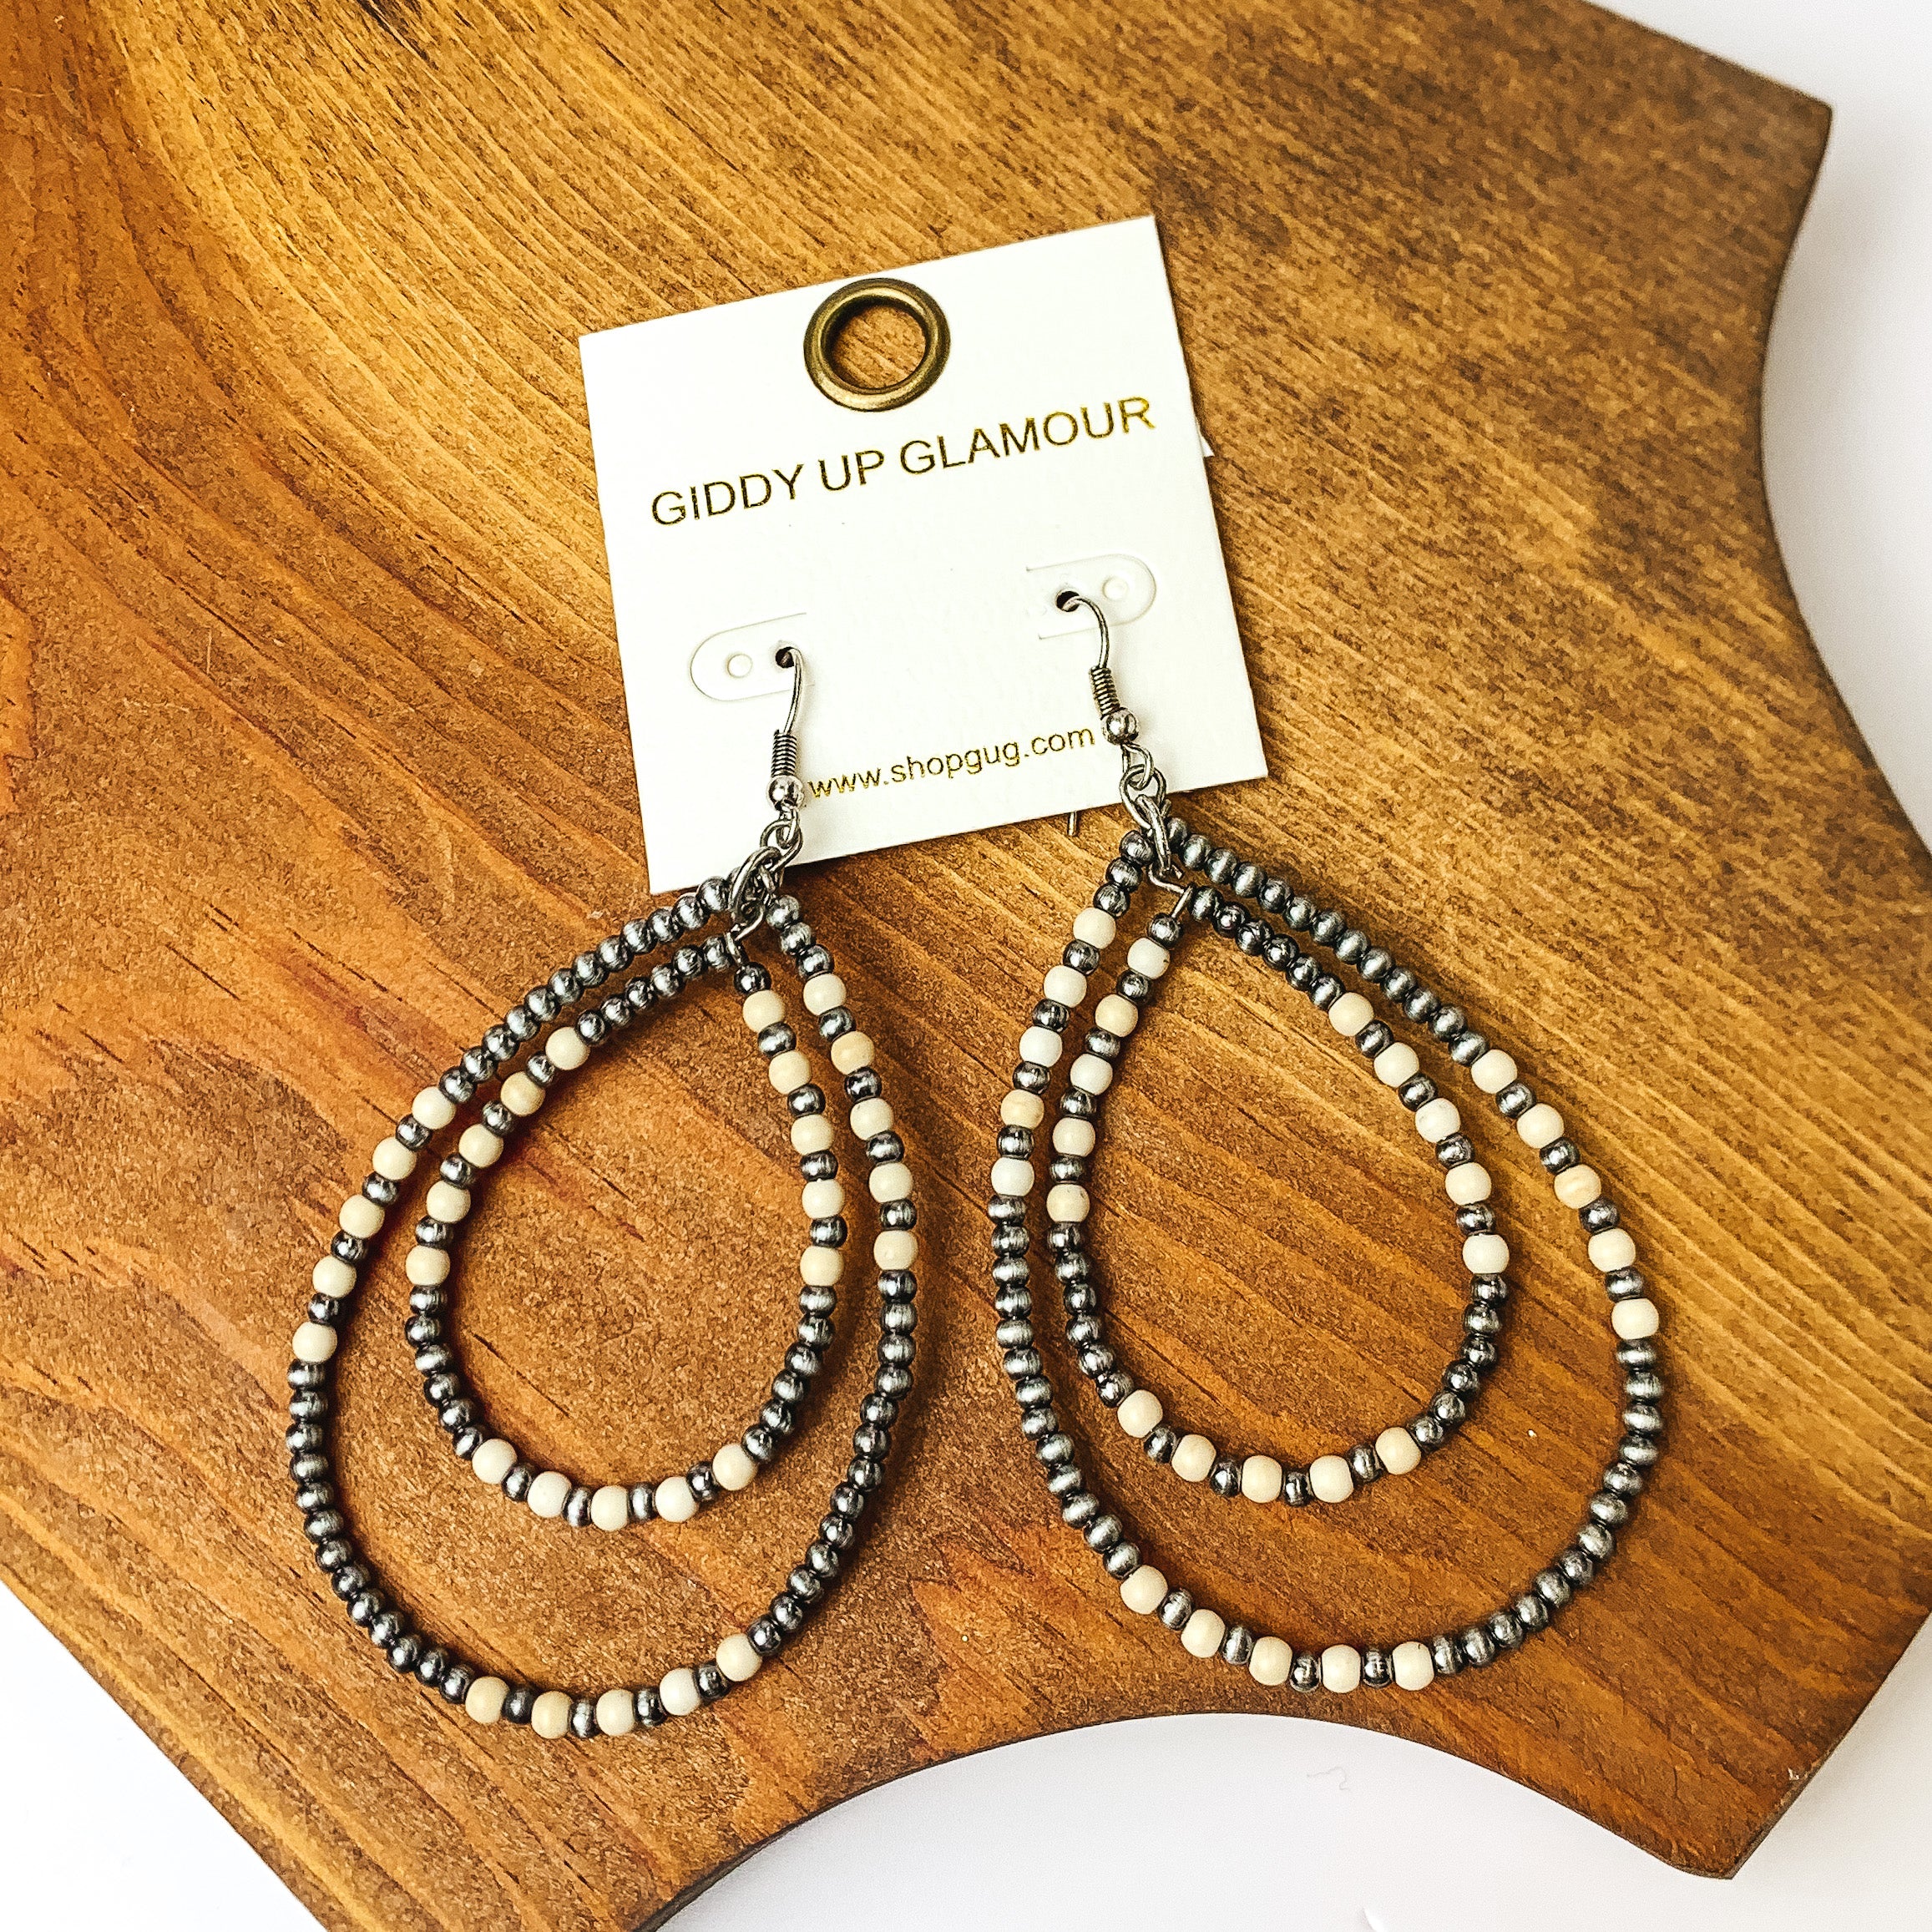 Beaded Open Double Drop Earrings in Silver Tone and Ivory. Pictured on a wood piece.